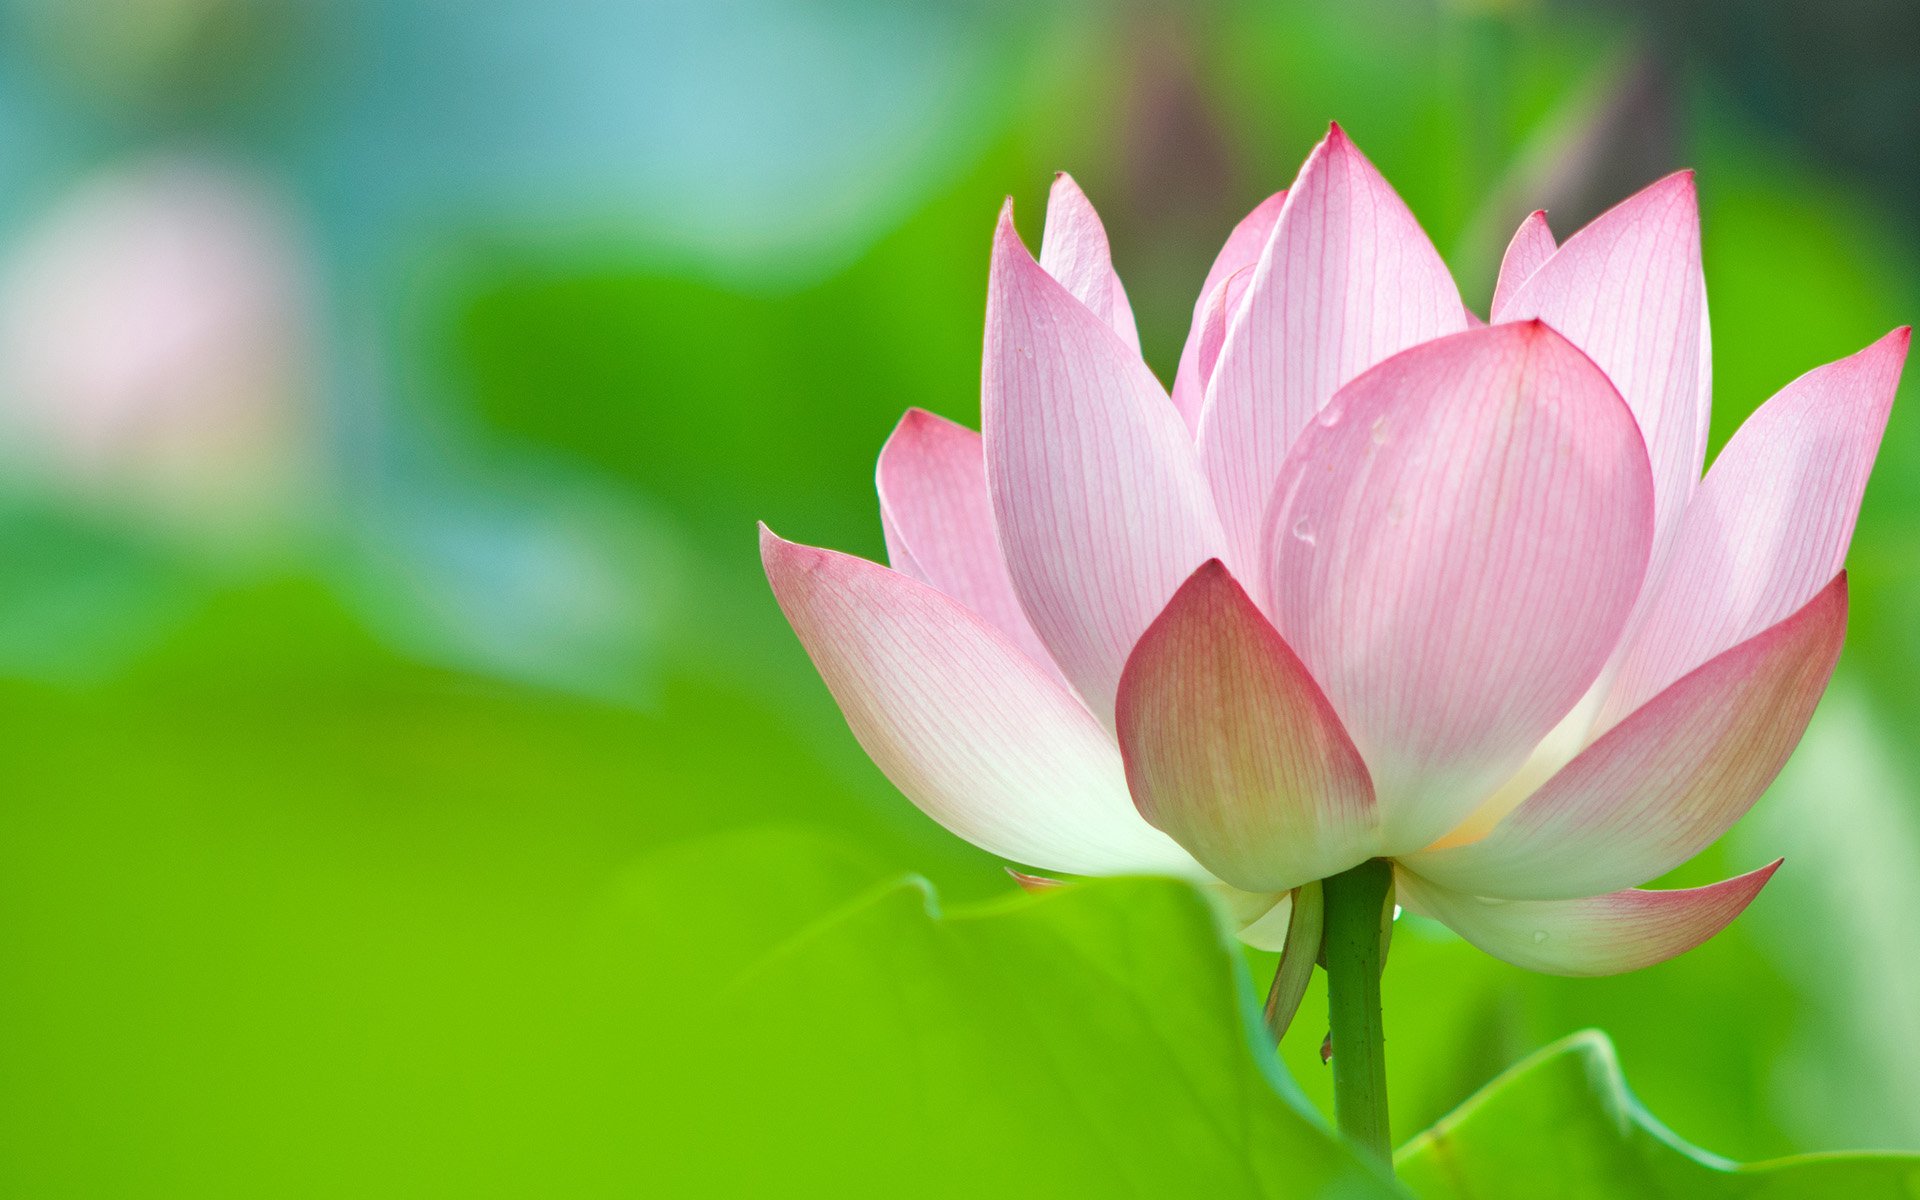 Lotus Flower Full HD Wallpaper and Background Image | 1920x1200 | ID:550041